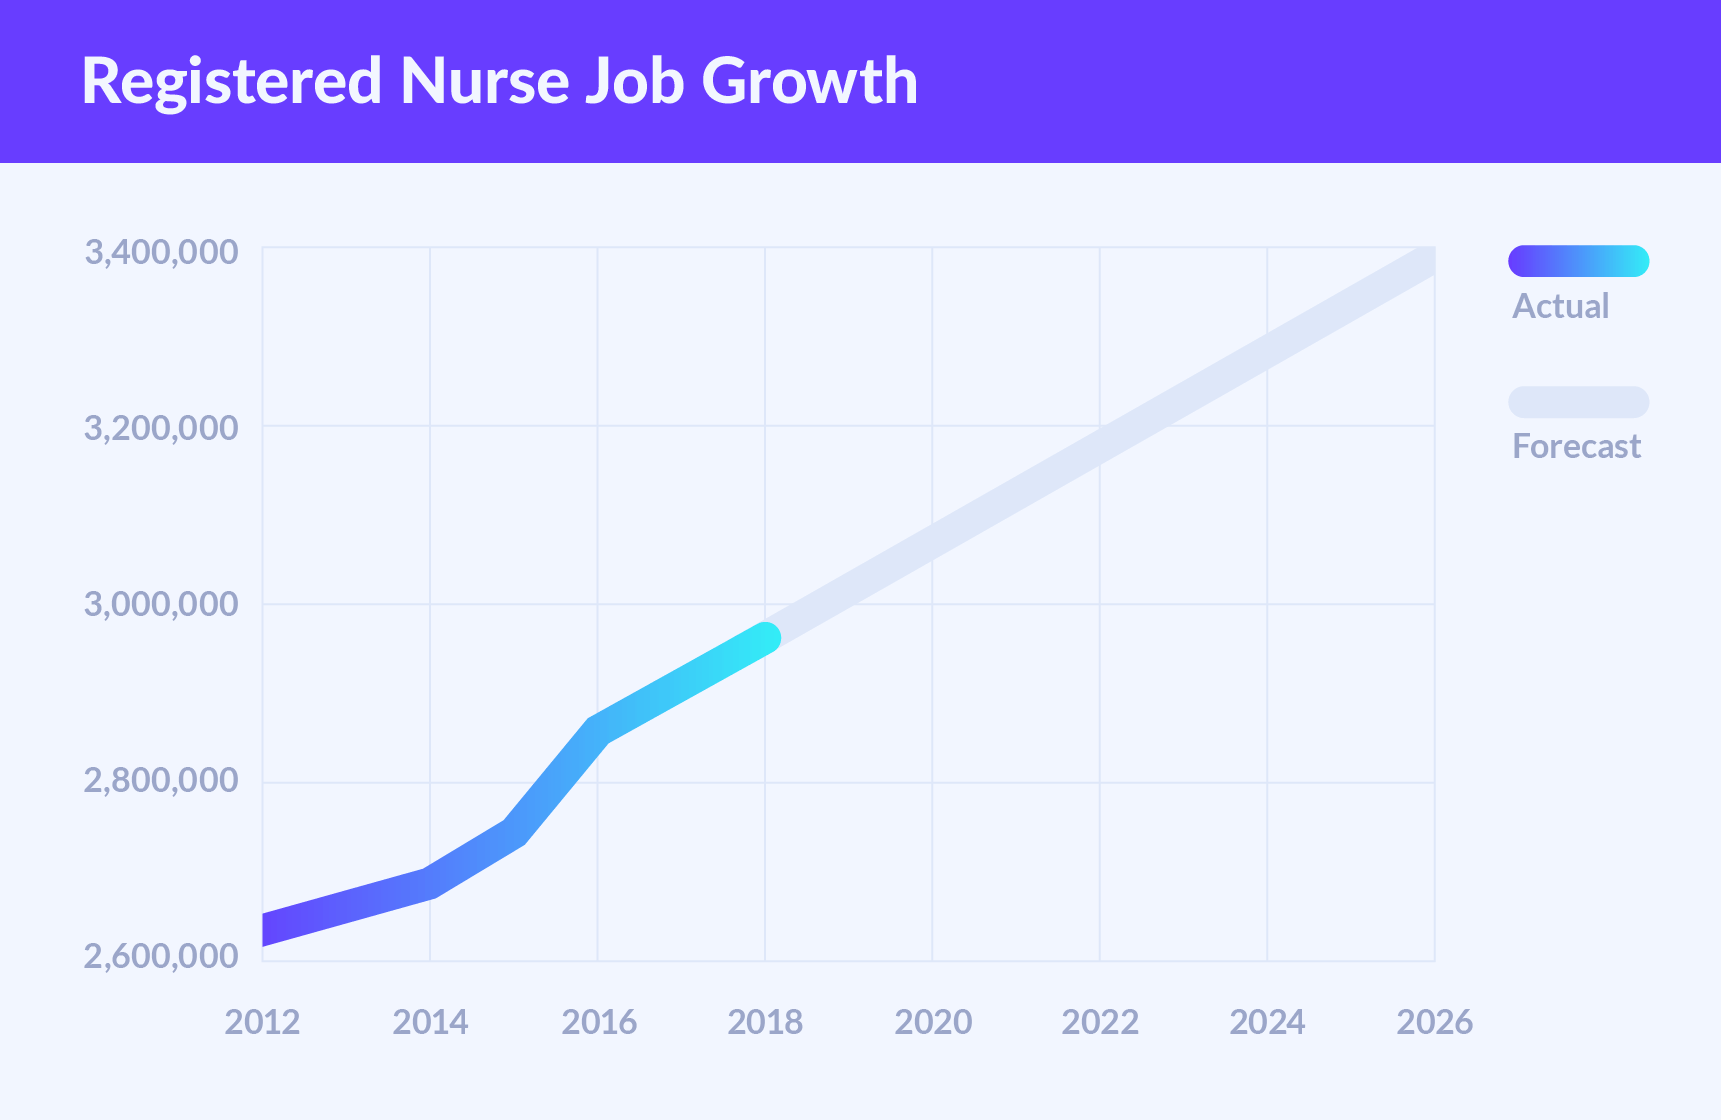 Projected job growth for nurses